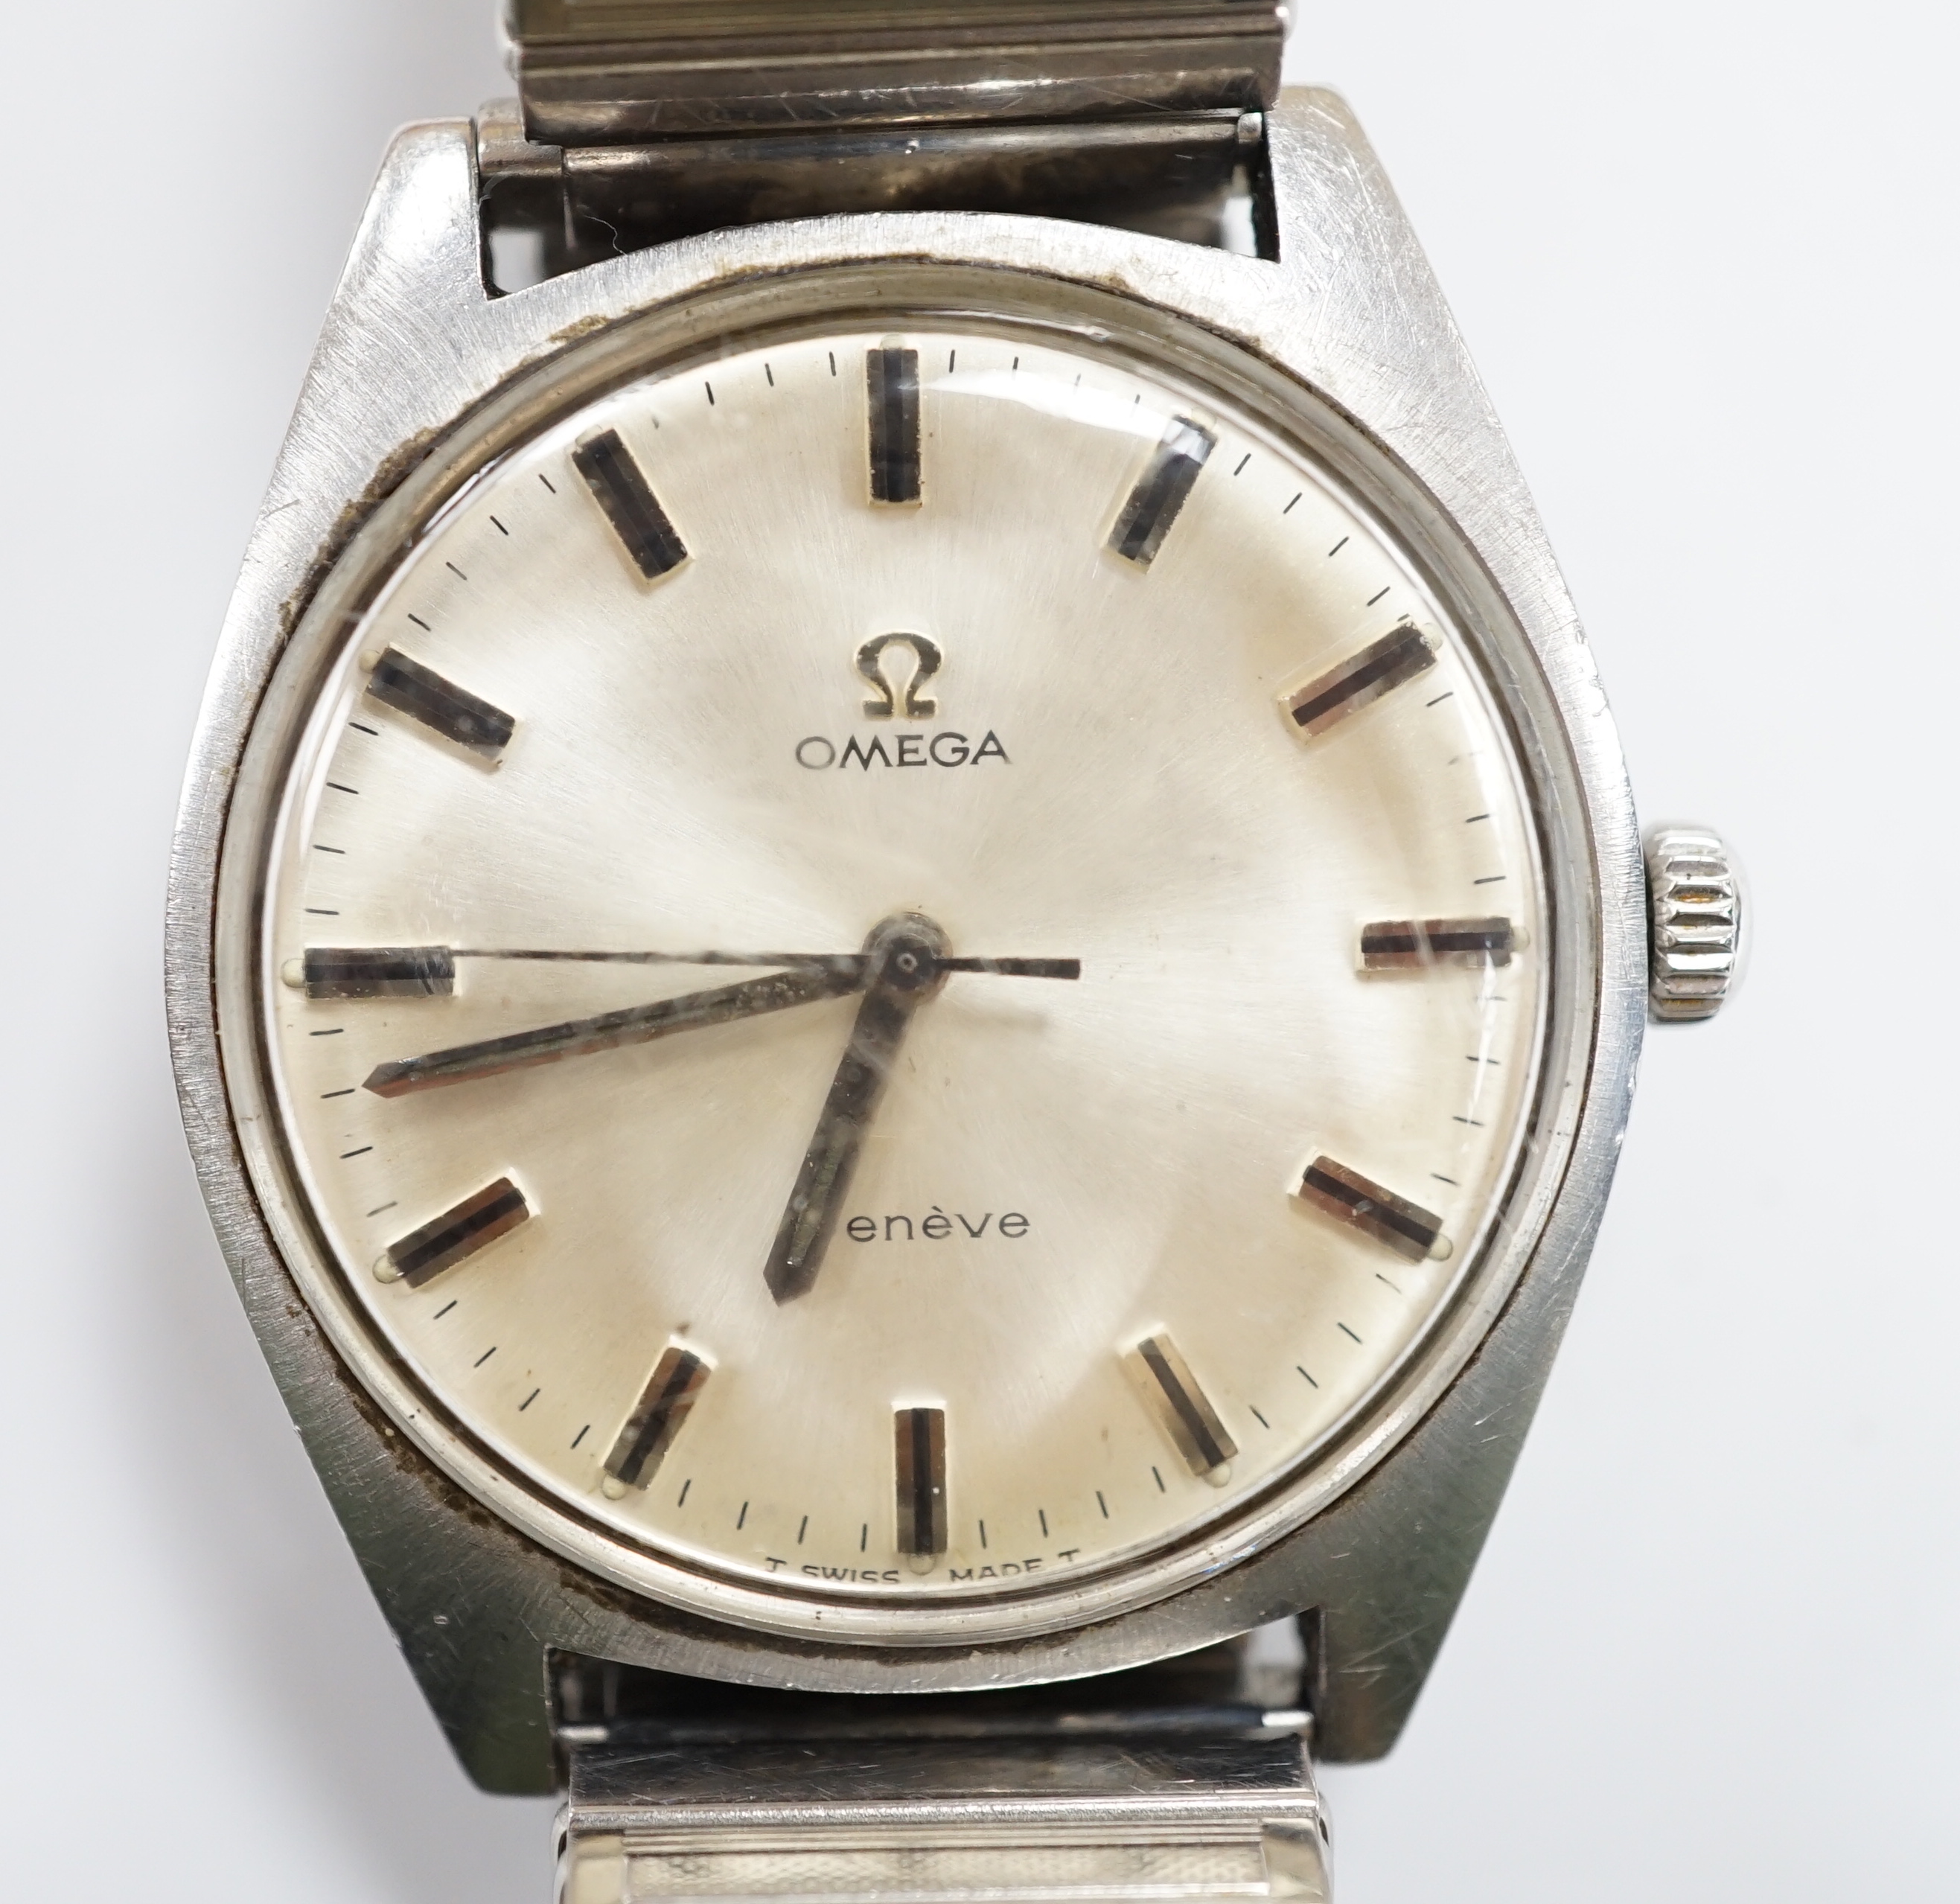 A gentleman's 1970's stainless steel Omega manual wind wrist watch, with baton numerals, cased diameter 36mm, with box and papers.